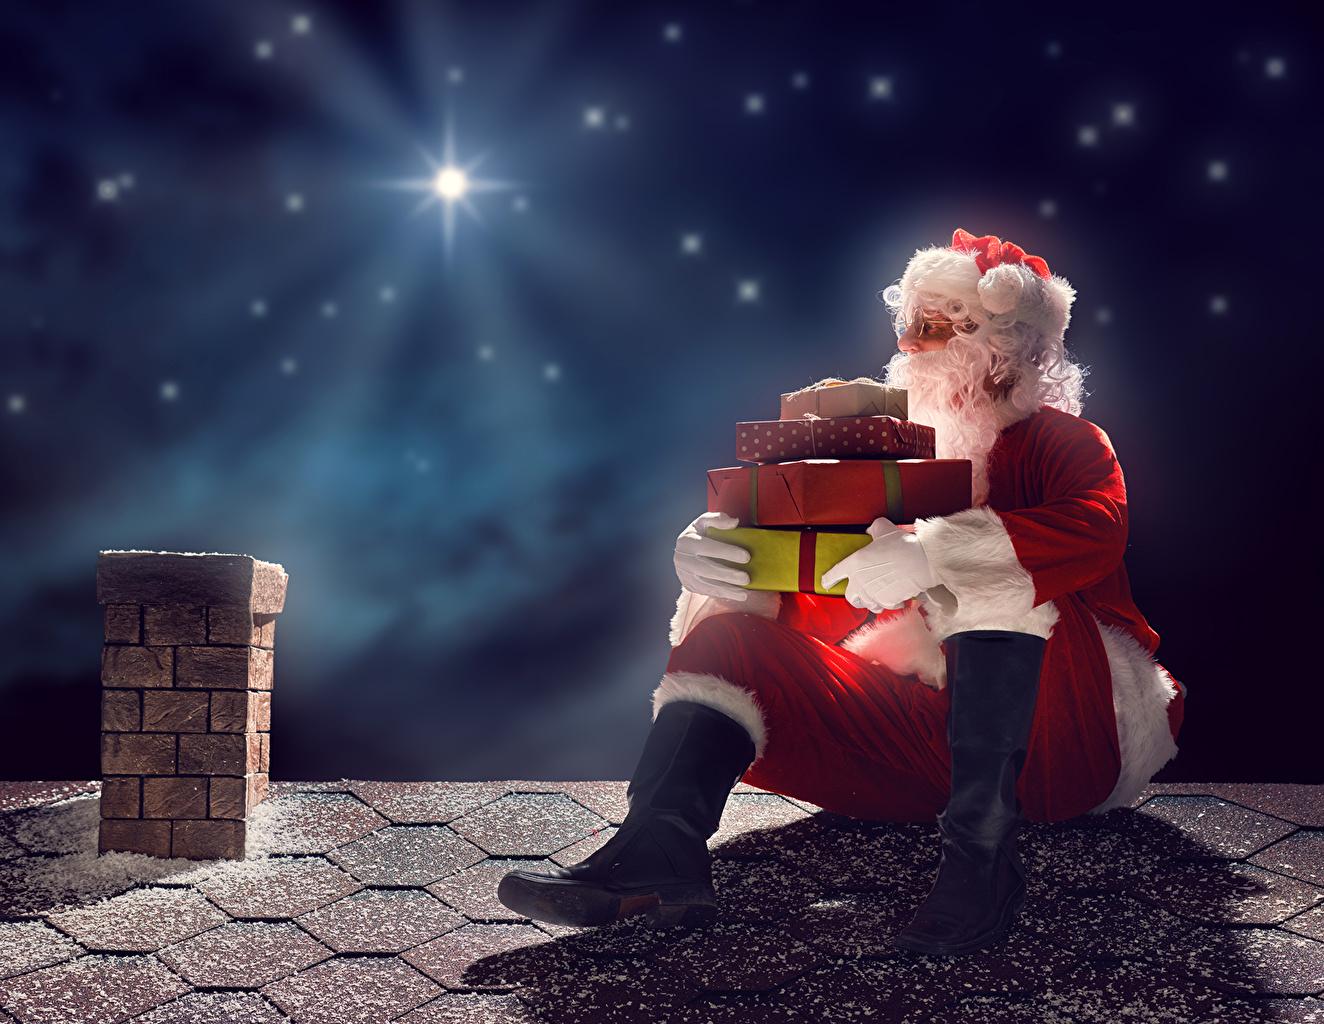 Starry Night Santa Claus Wallpapers Wallpaper Cave